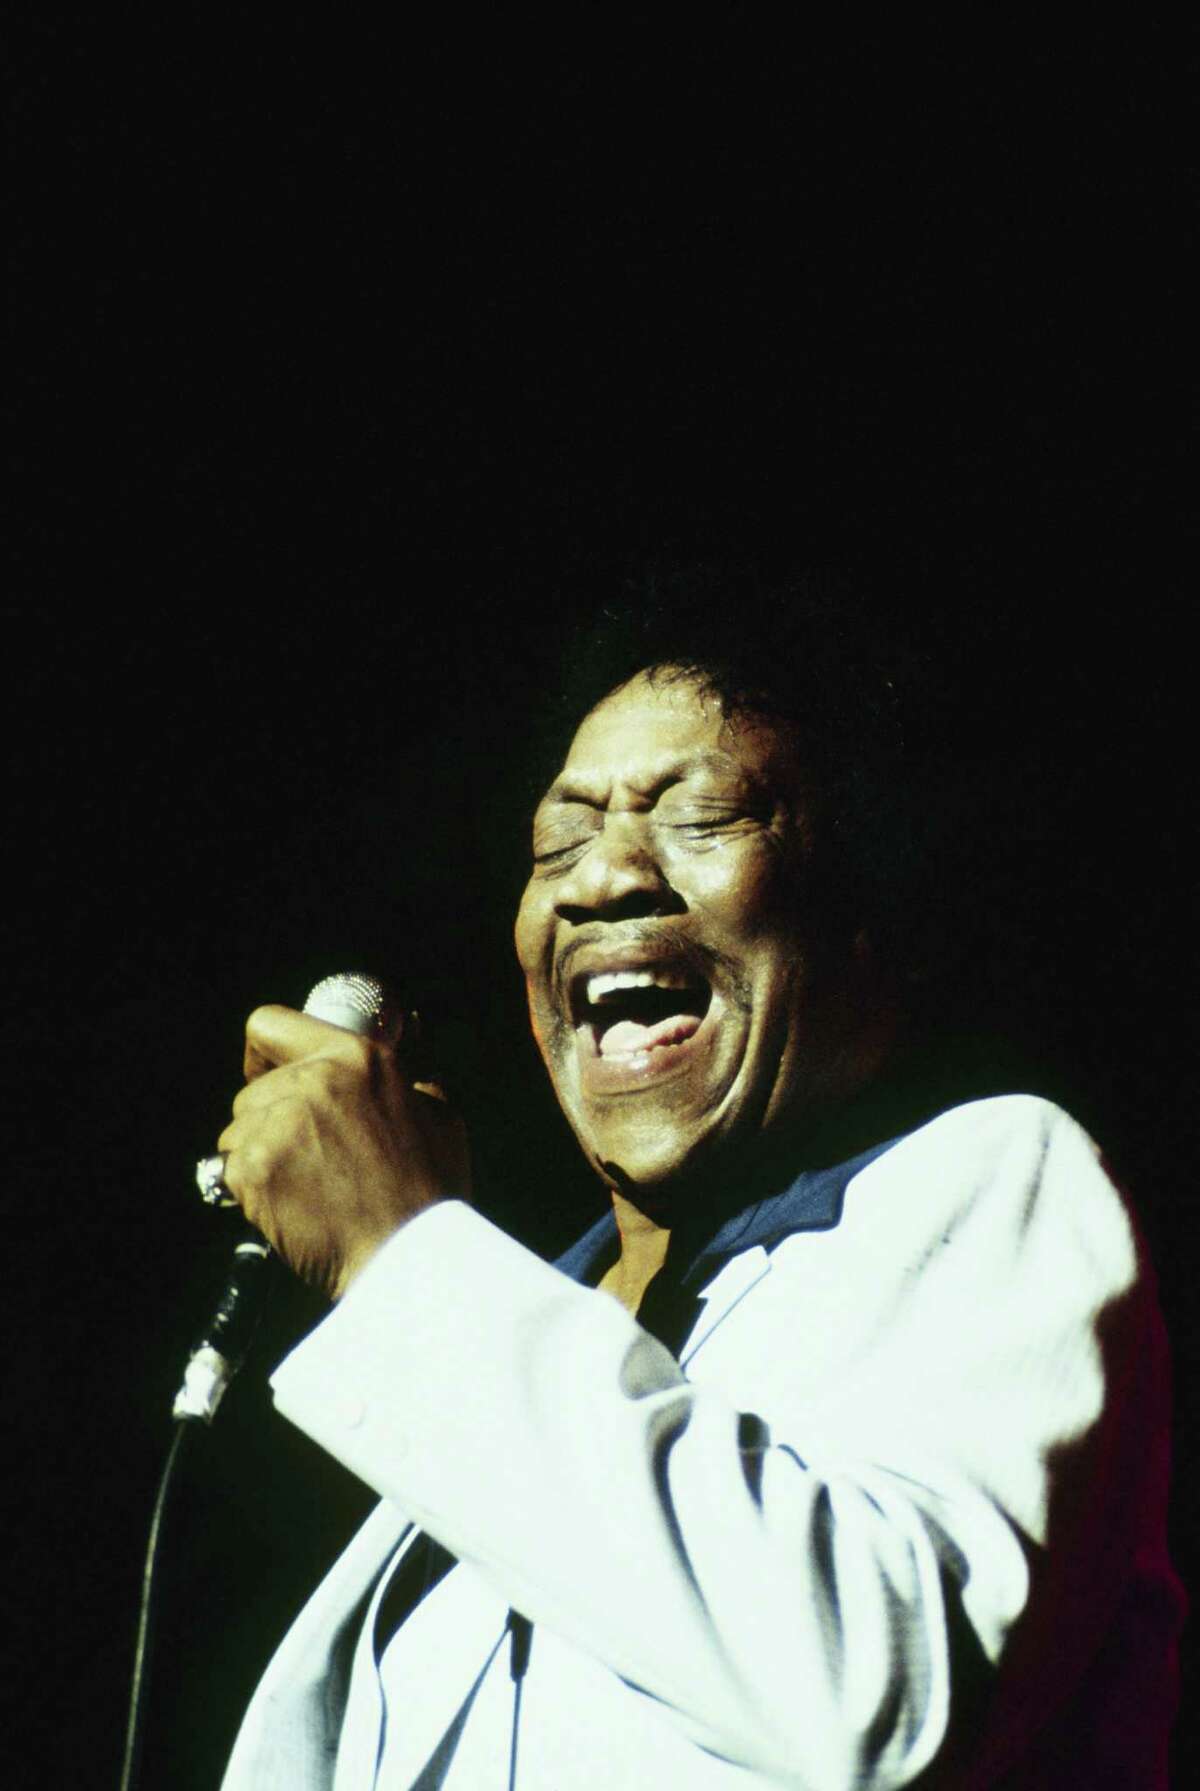 Bobby "Blue" Bland had many ties to Houston. His record label, booking agency, songwriters and musicians were all connected to the city, and Bland became a star here.